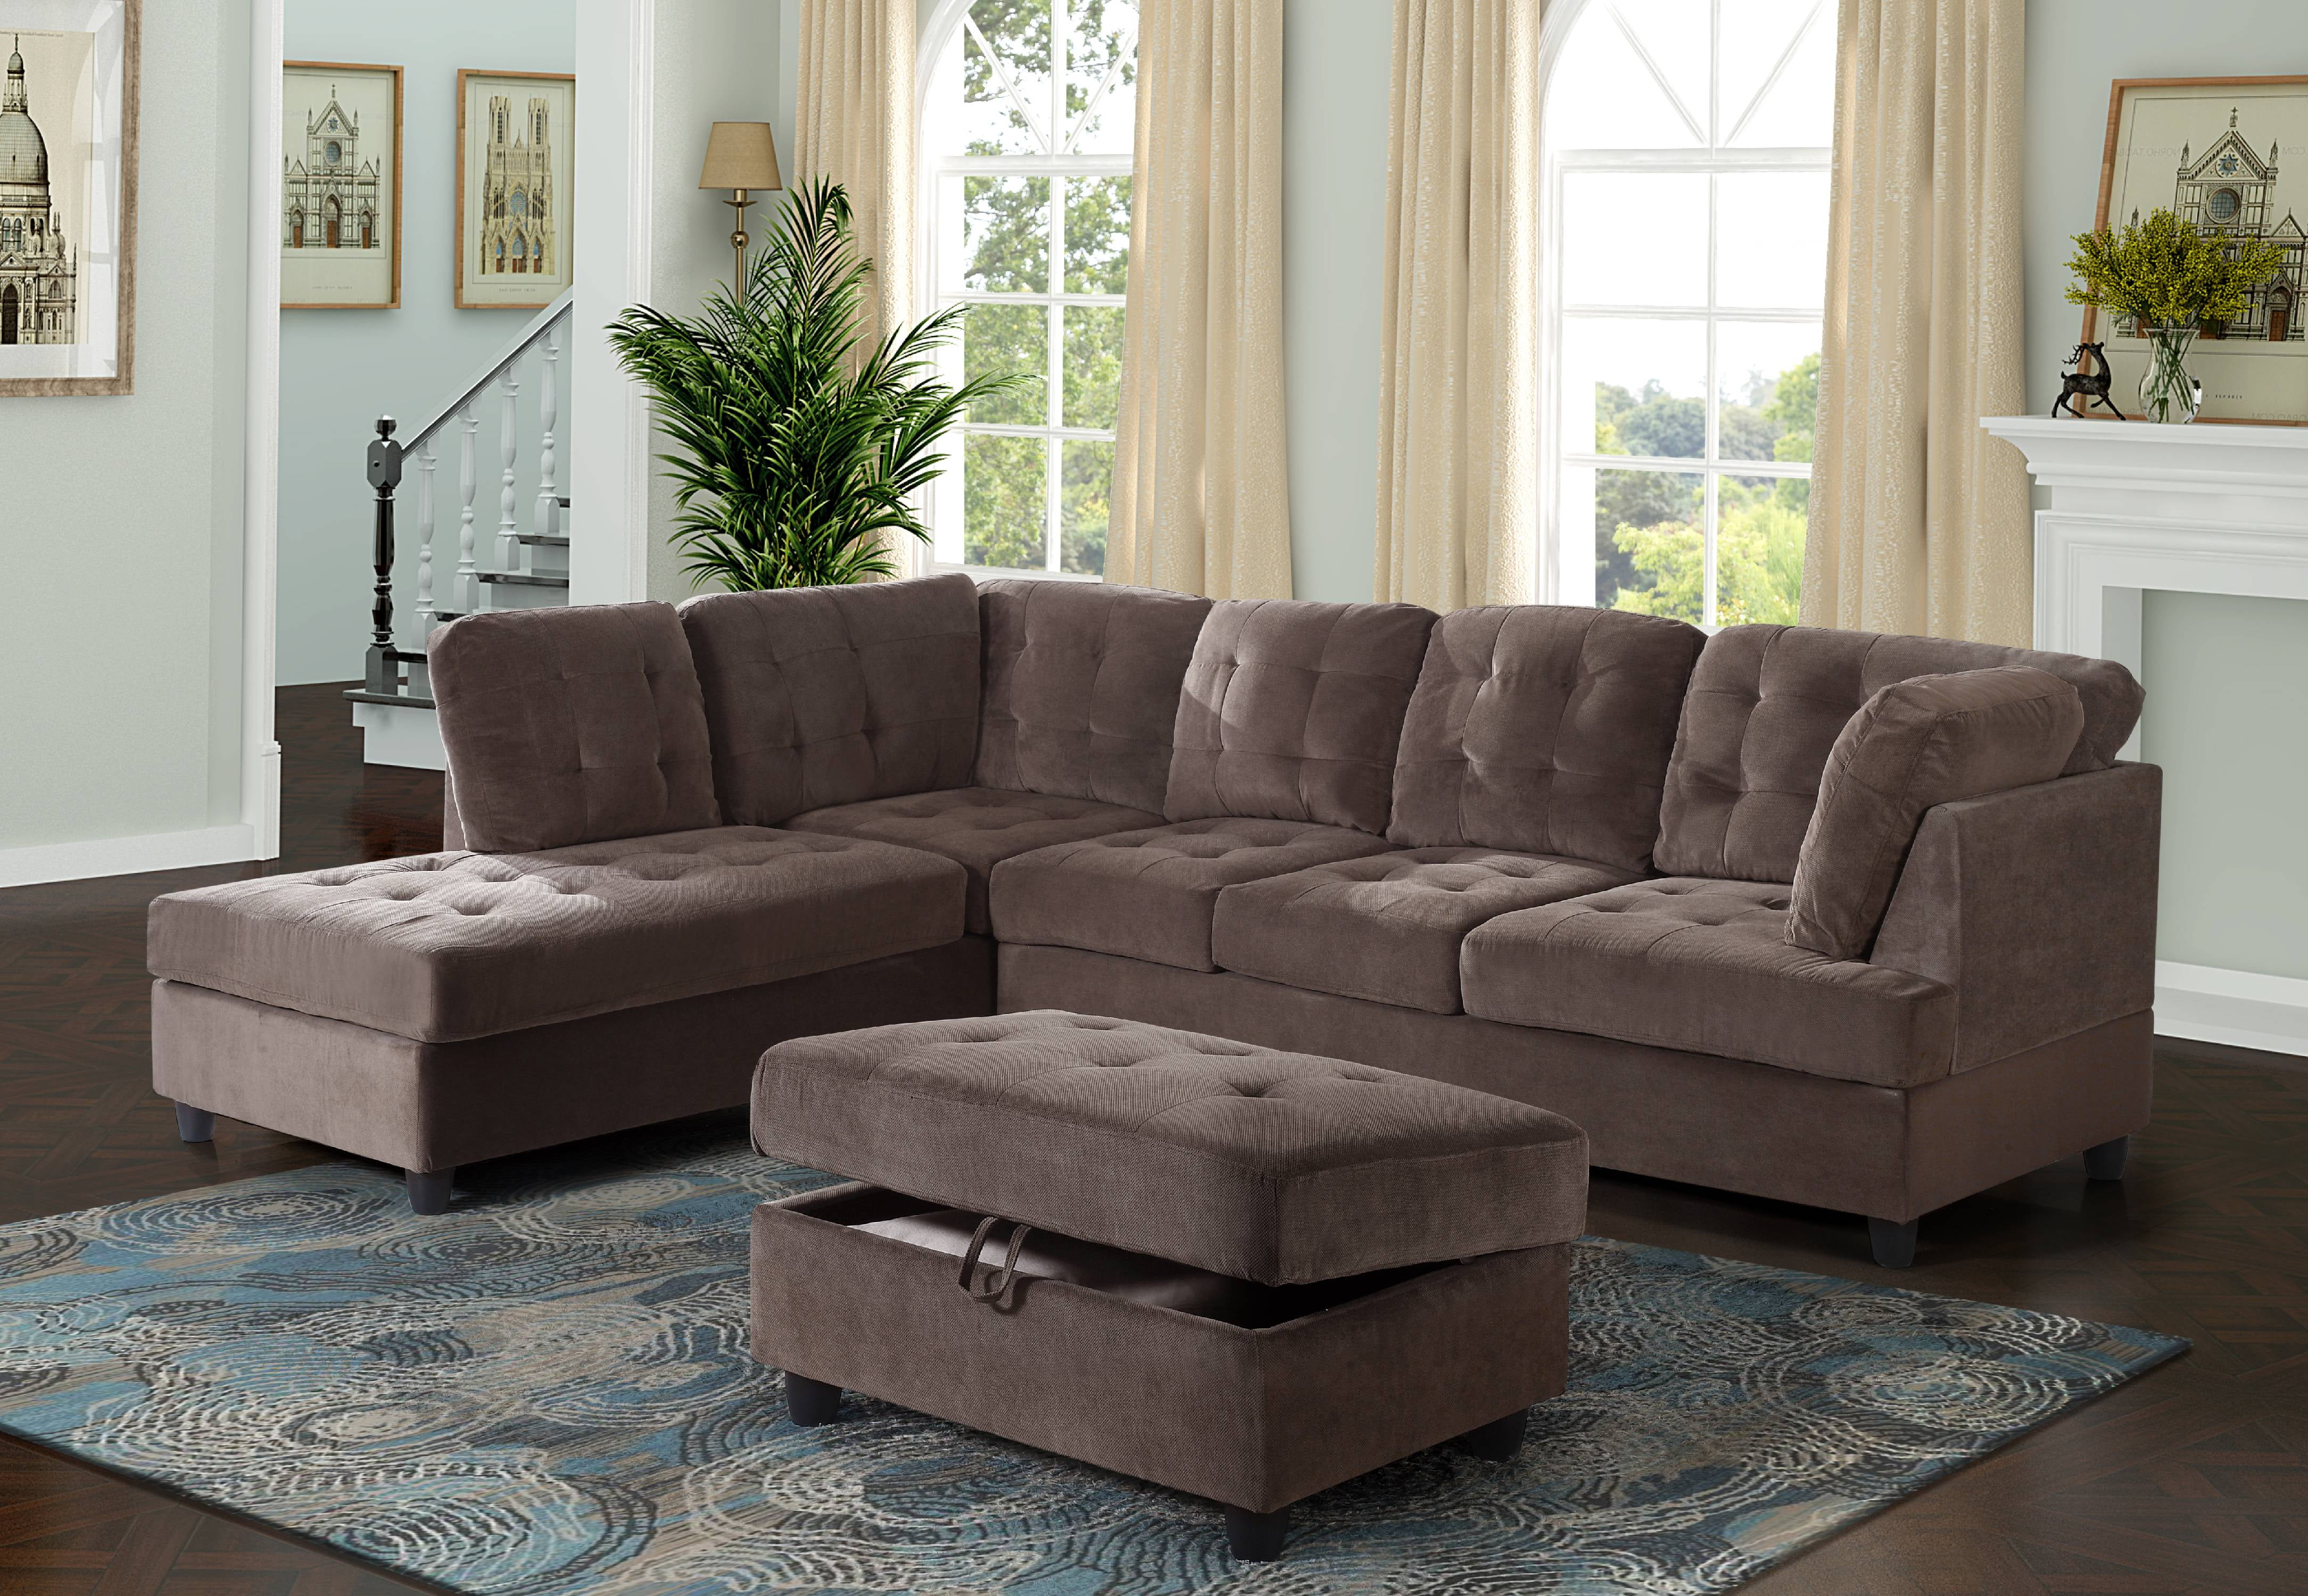 L Shape Sectional Sofa, Sectional Sofa With Chaise And Storage Ottoman